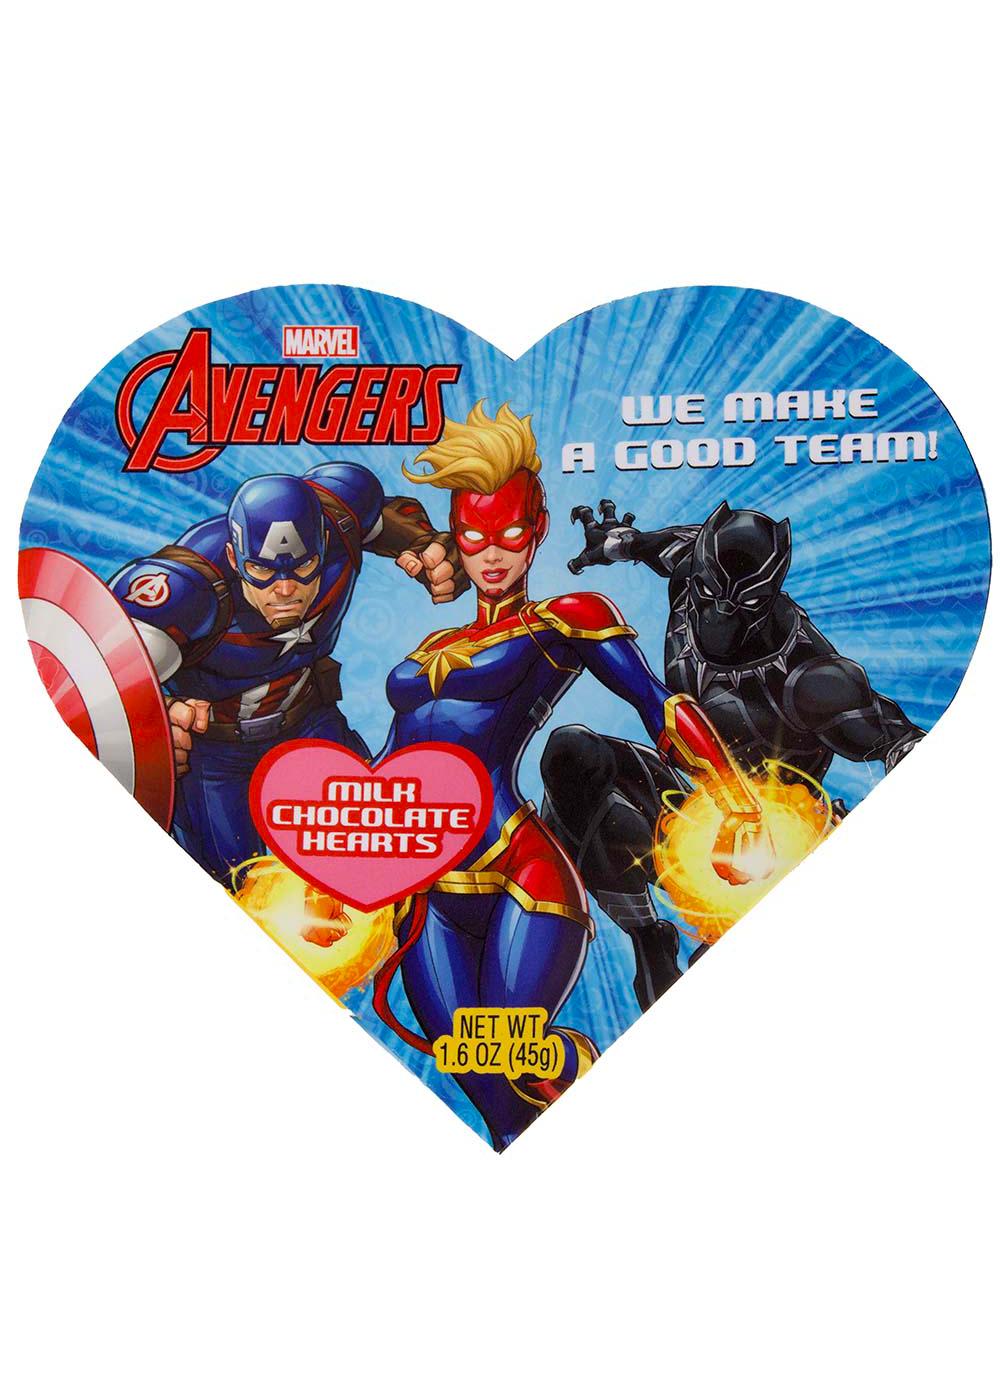 Frankford Marvel Avengers Milk Chocolate Hearts Valentine's Gift Box; image 1 of 2